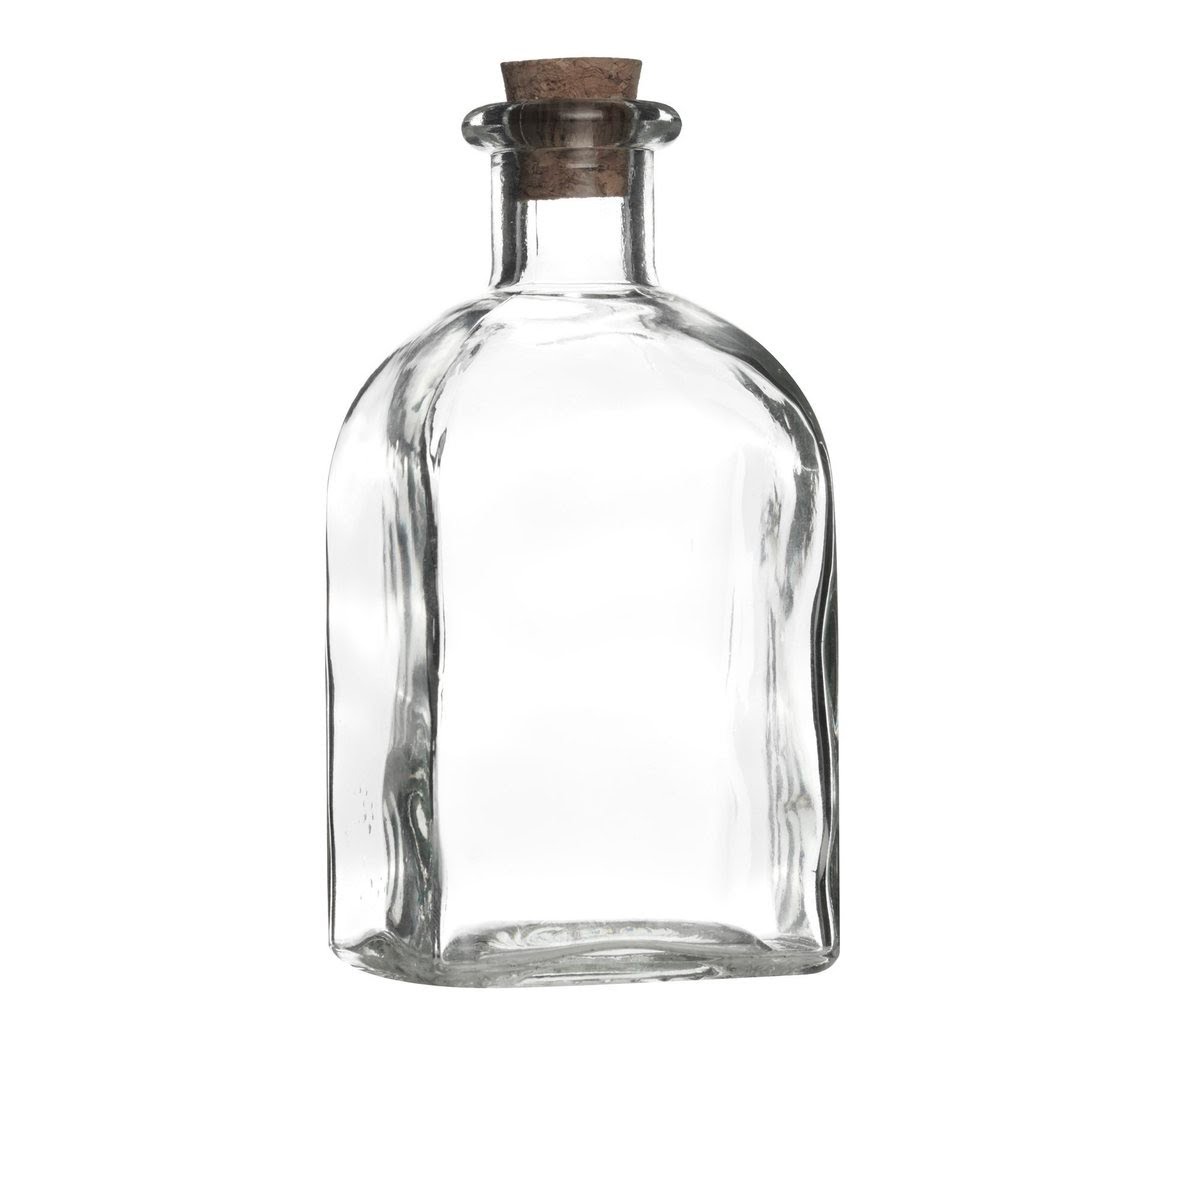 Glass green bottle PNG image